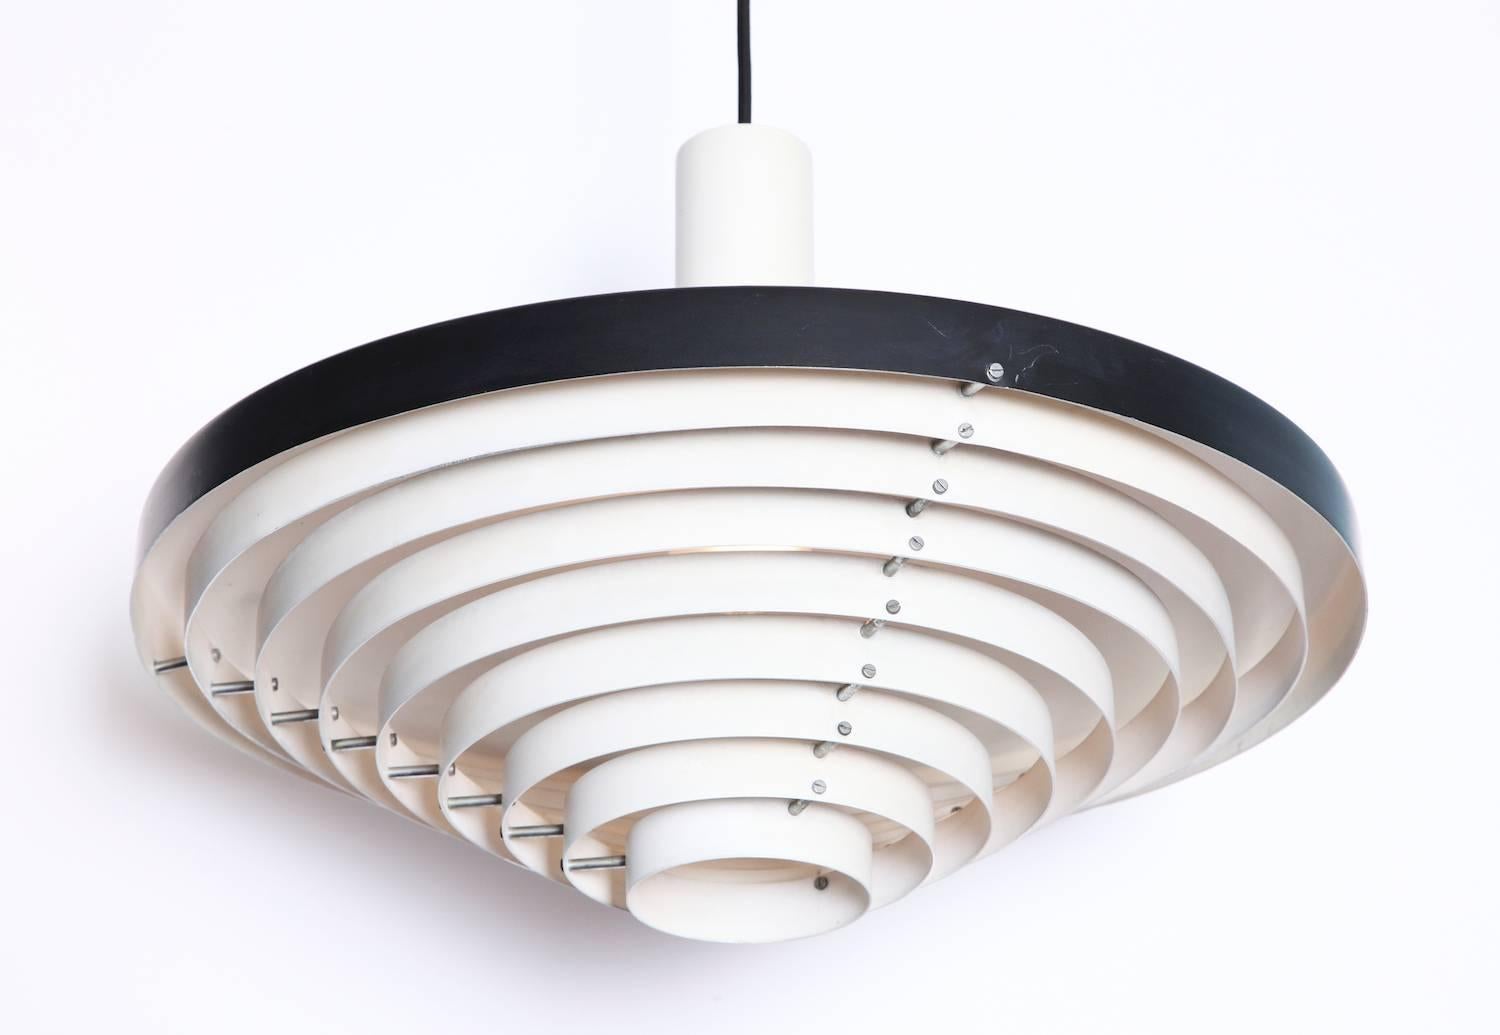 Rare pendant light by Stilnovo. Circular hanging light, with slatted detailing. Black and white lacquered aluminum and chromed metal spacers. Original Stilnovo label on top. A rare from in excellent condition.